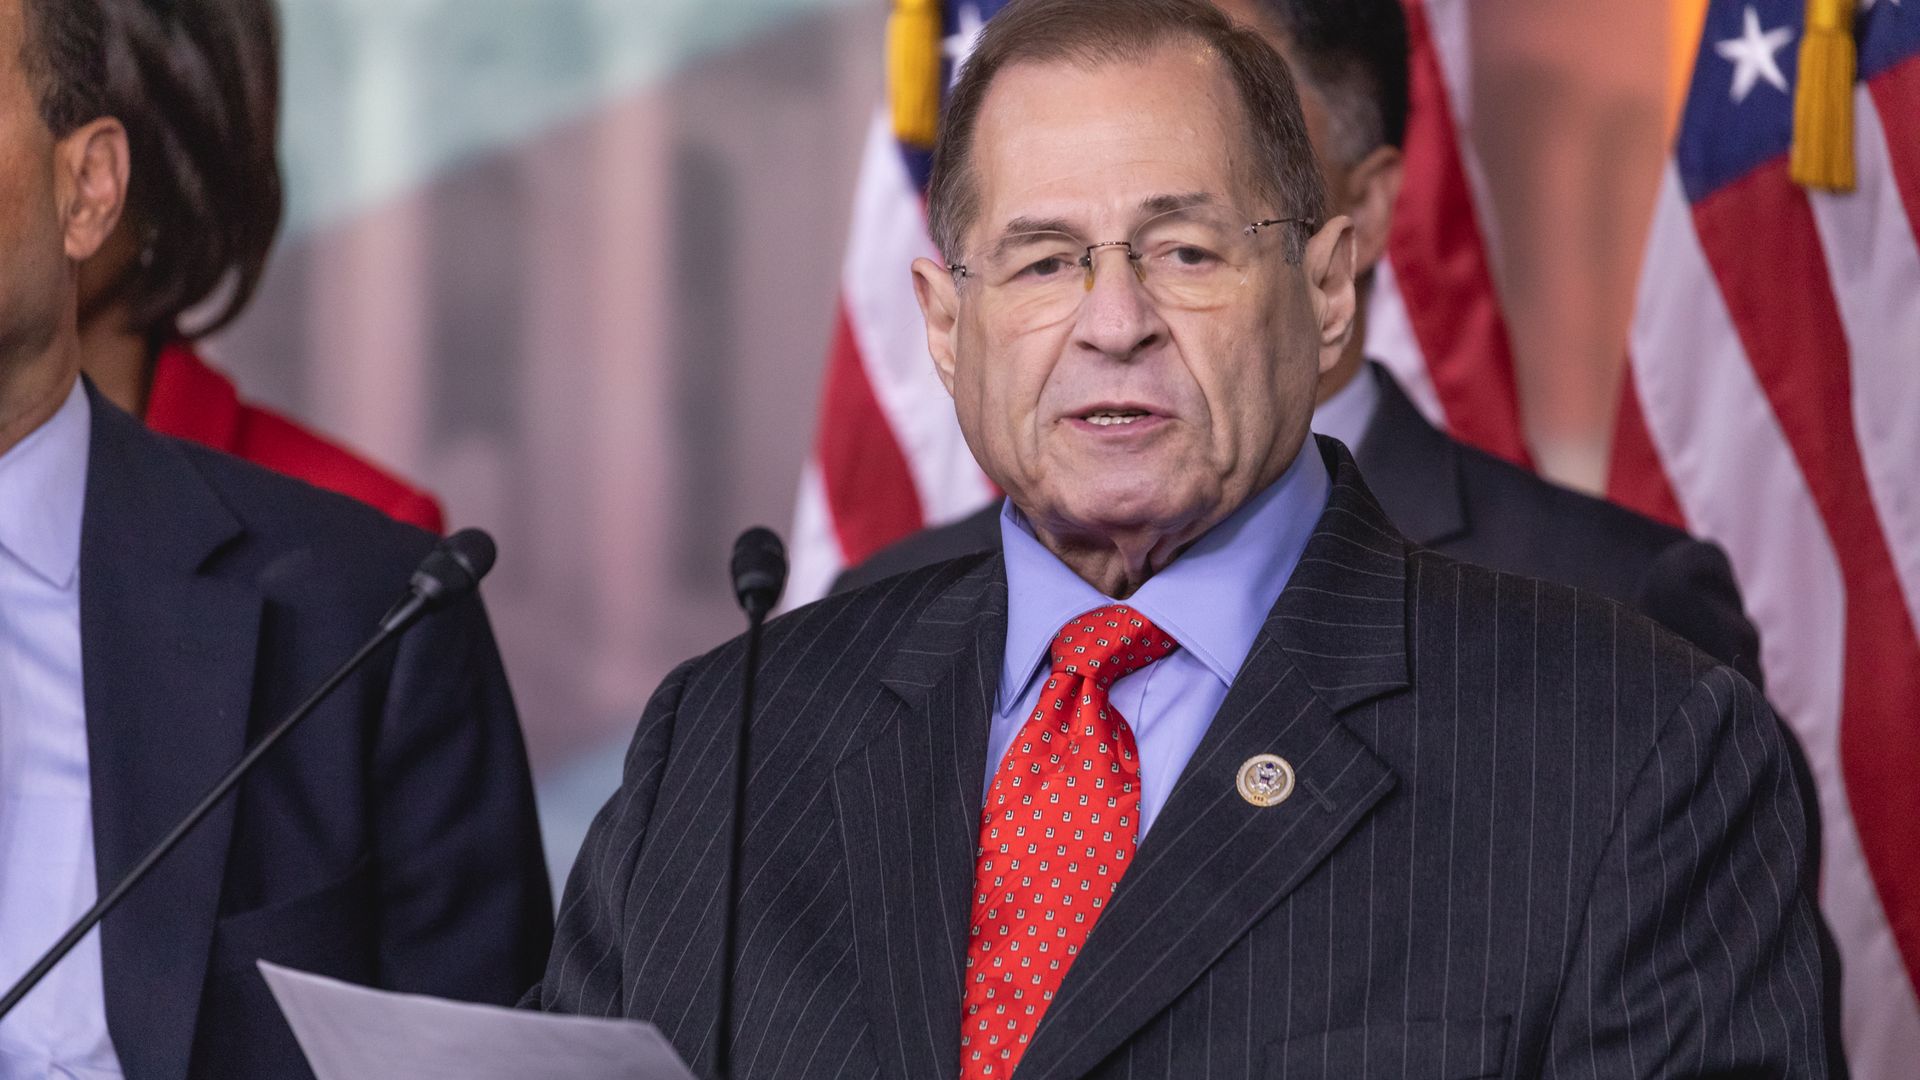 Rep. Jerry Nadler standing at a podium in the Capitol building wearing a red tie.